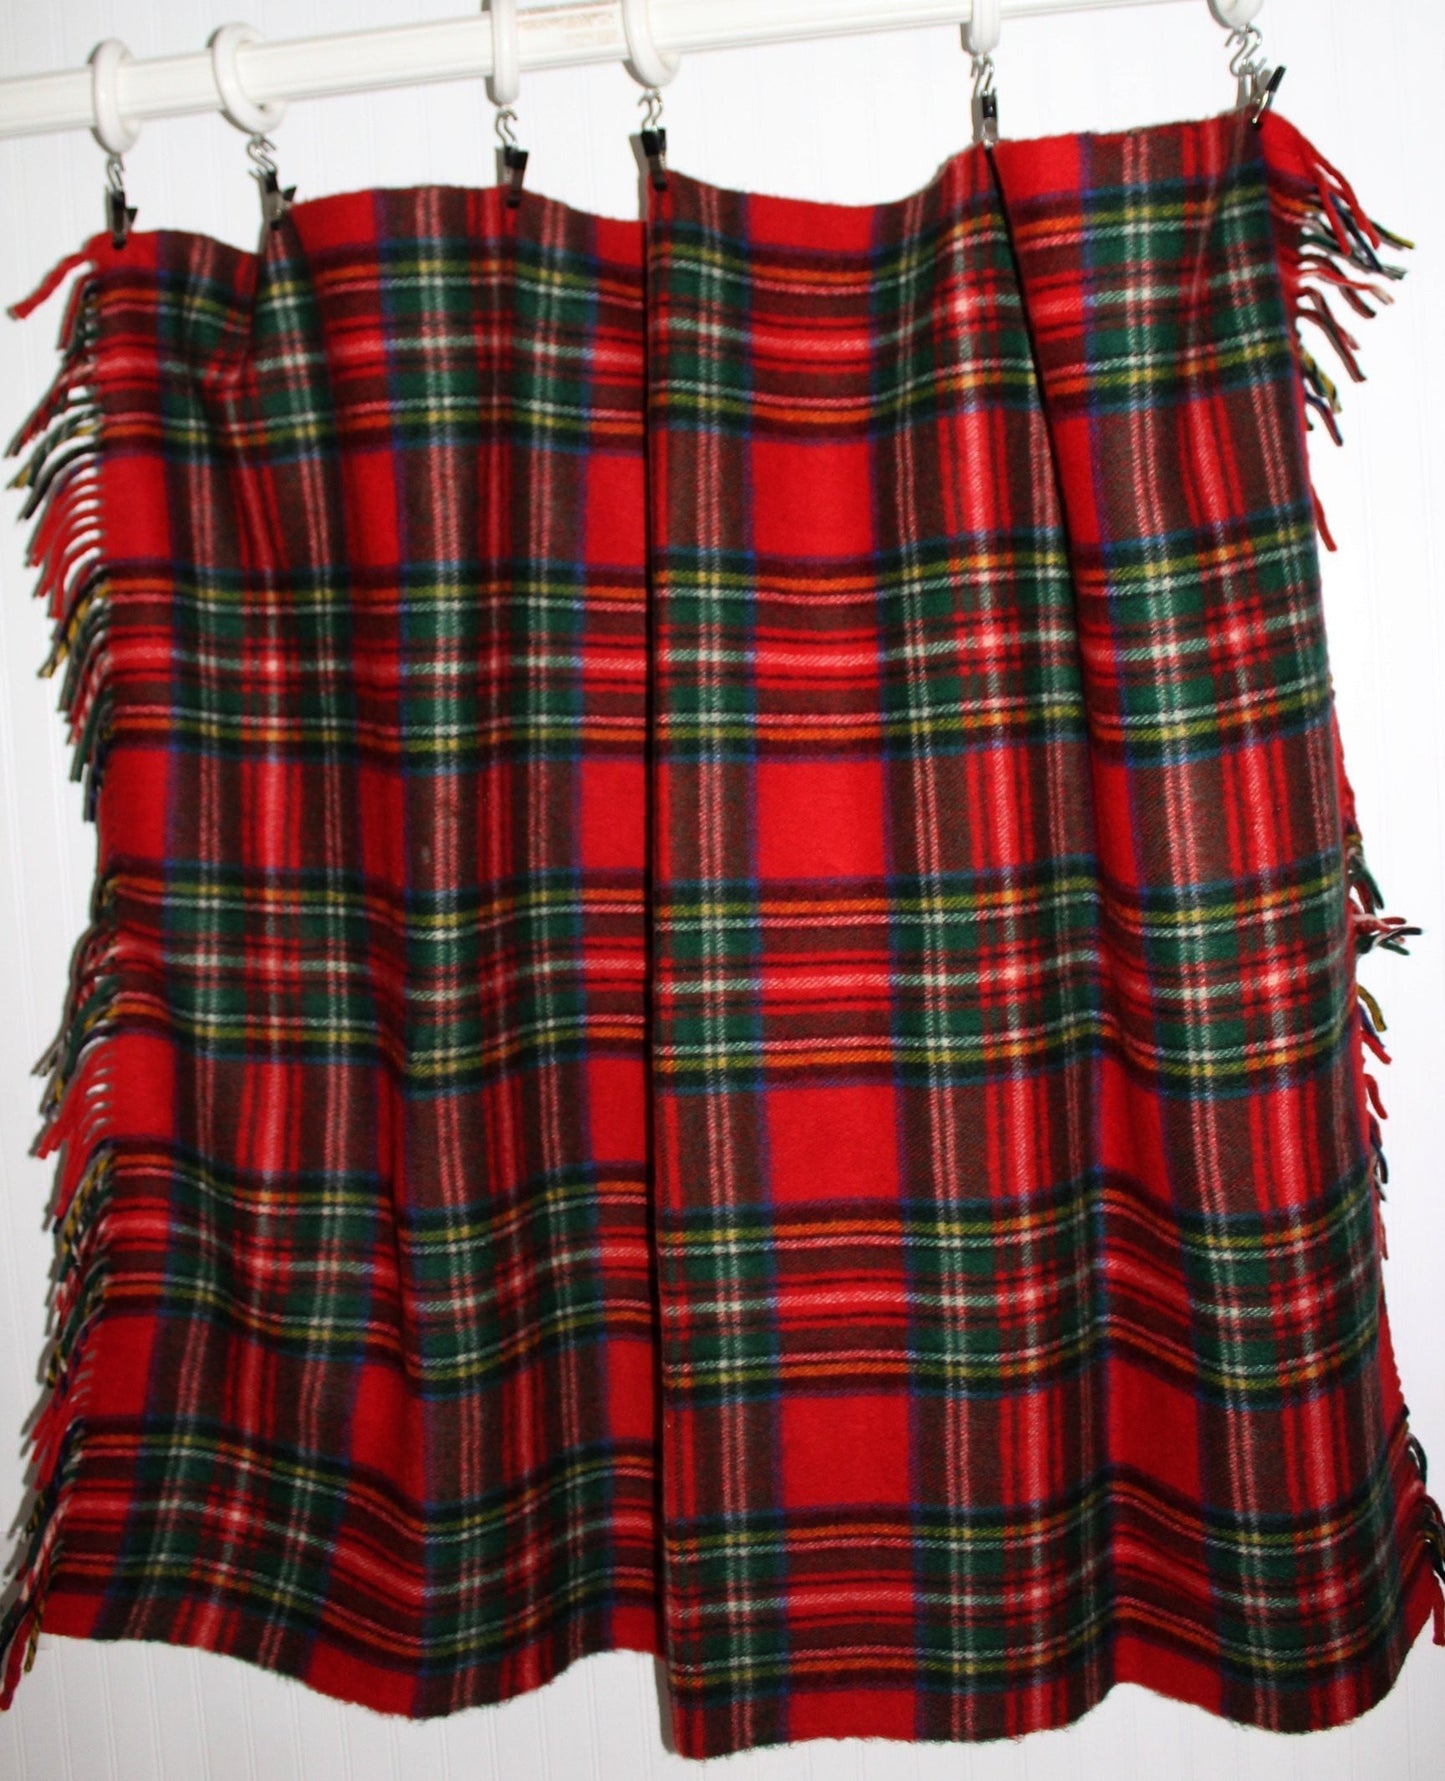 Horner Wool Fringed Throw 51" X 63" Red Tartan Plaid Heavy Soft Nap Excellent 1950s rare condition